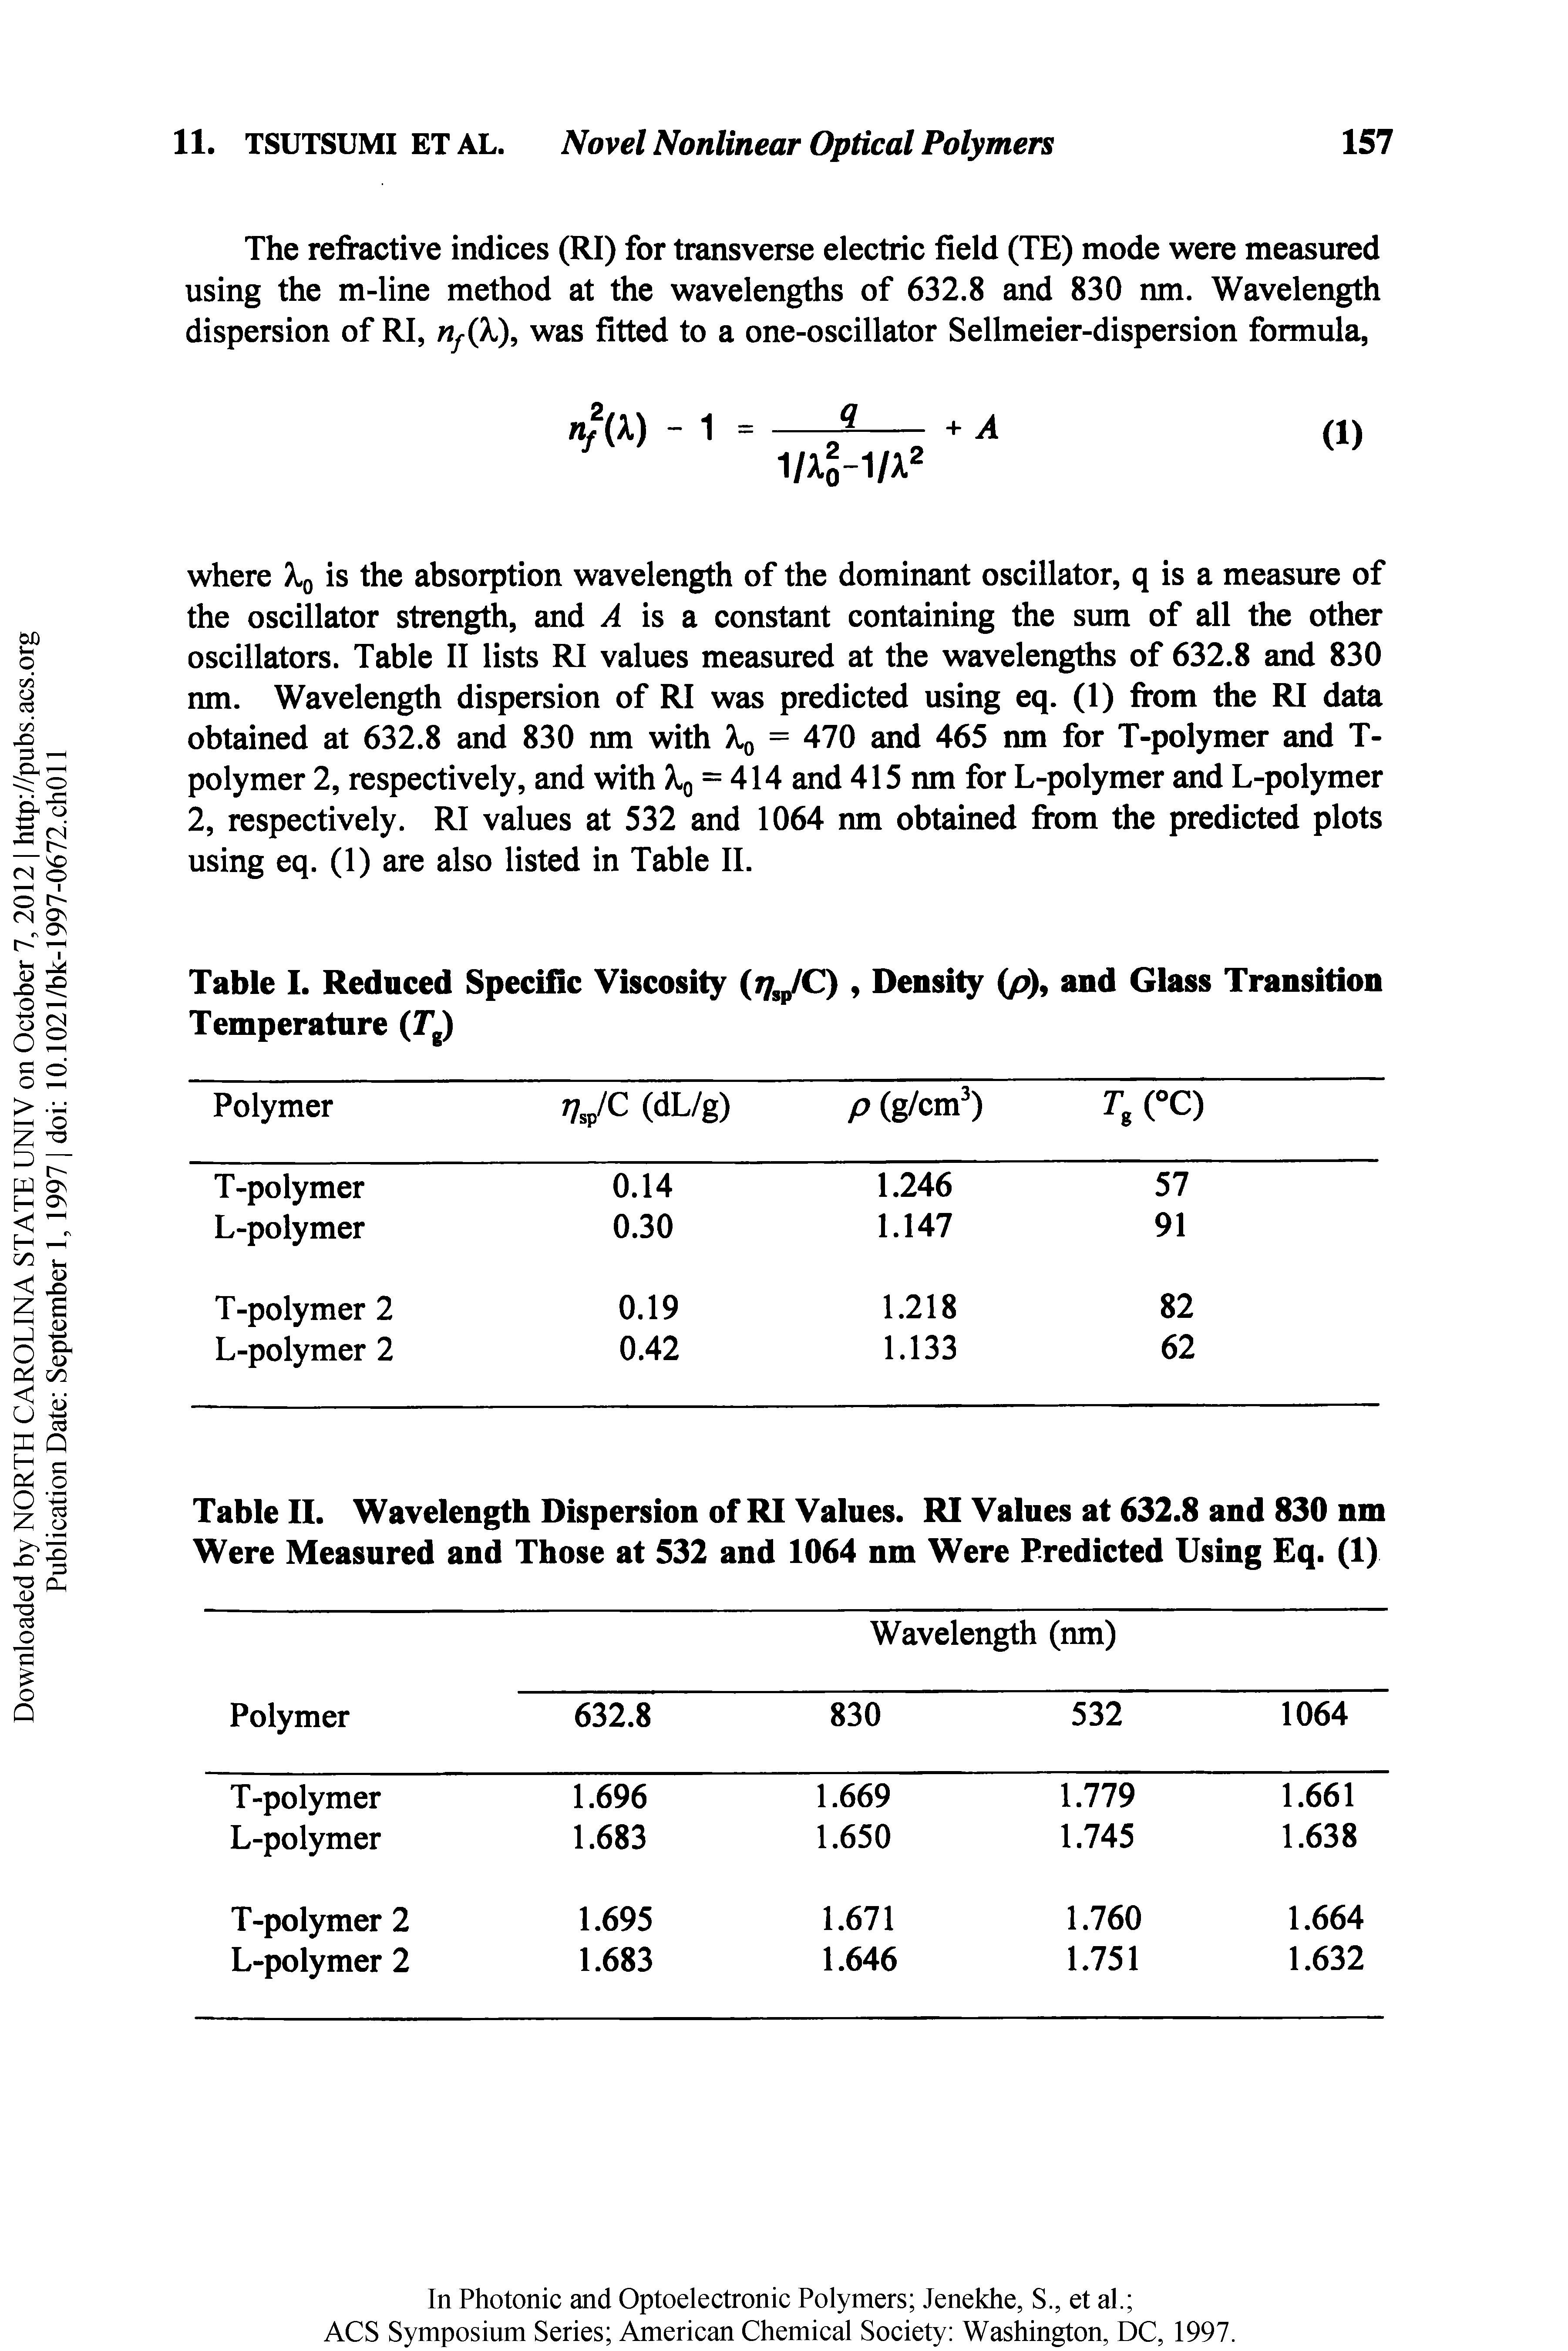 Table I. Reduced Specific Viscosity ijiJC), Density (/9), and Glass Transition Temperature (Jg)...